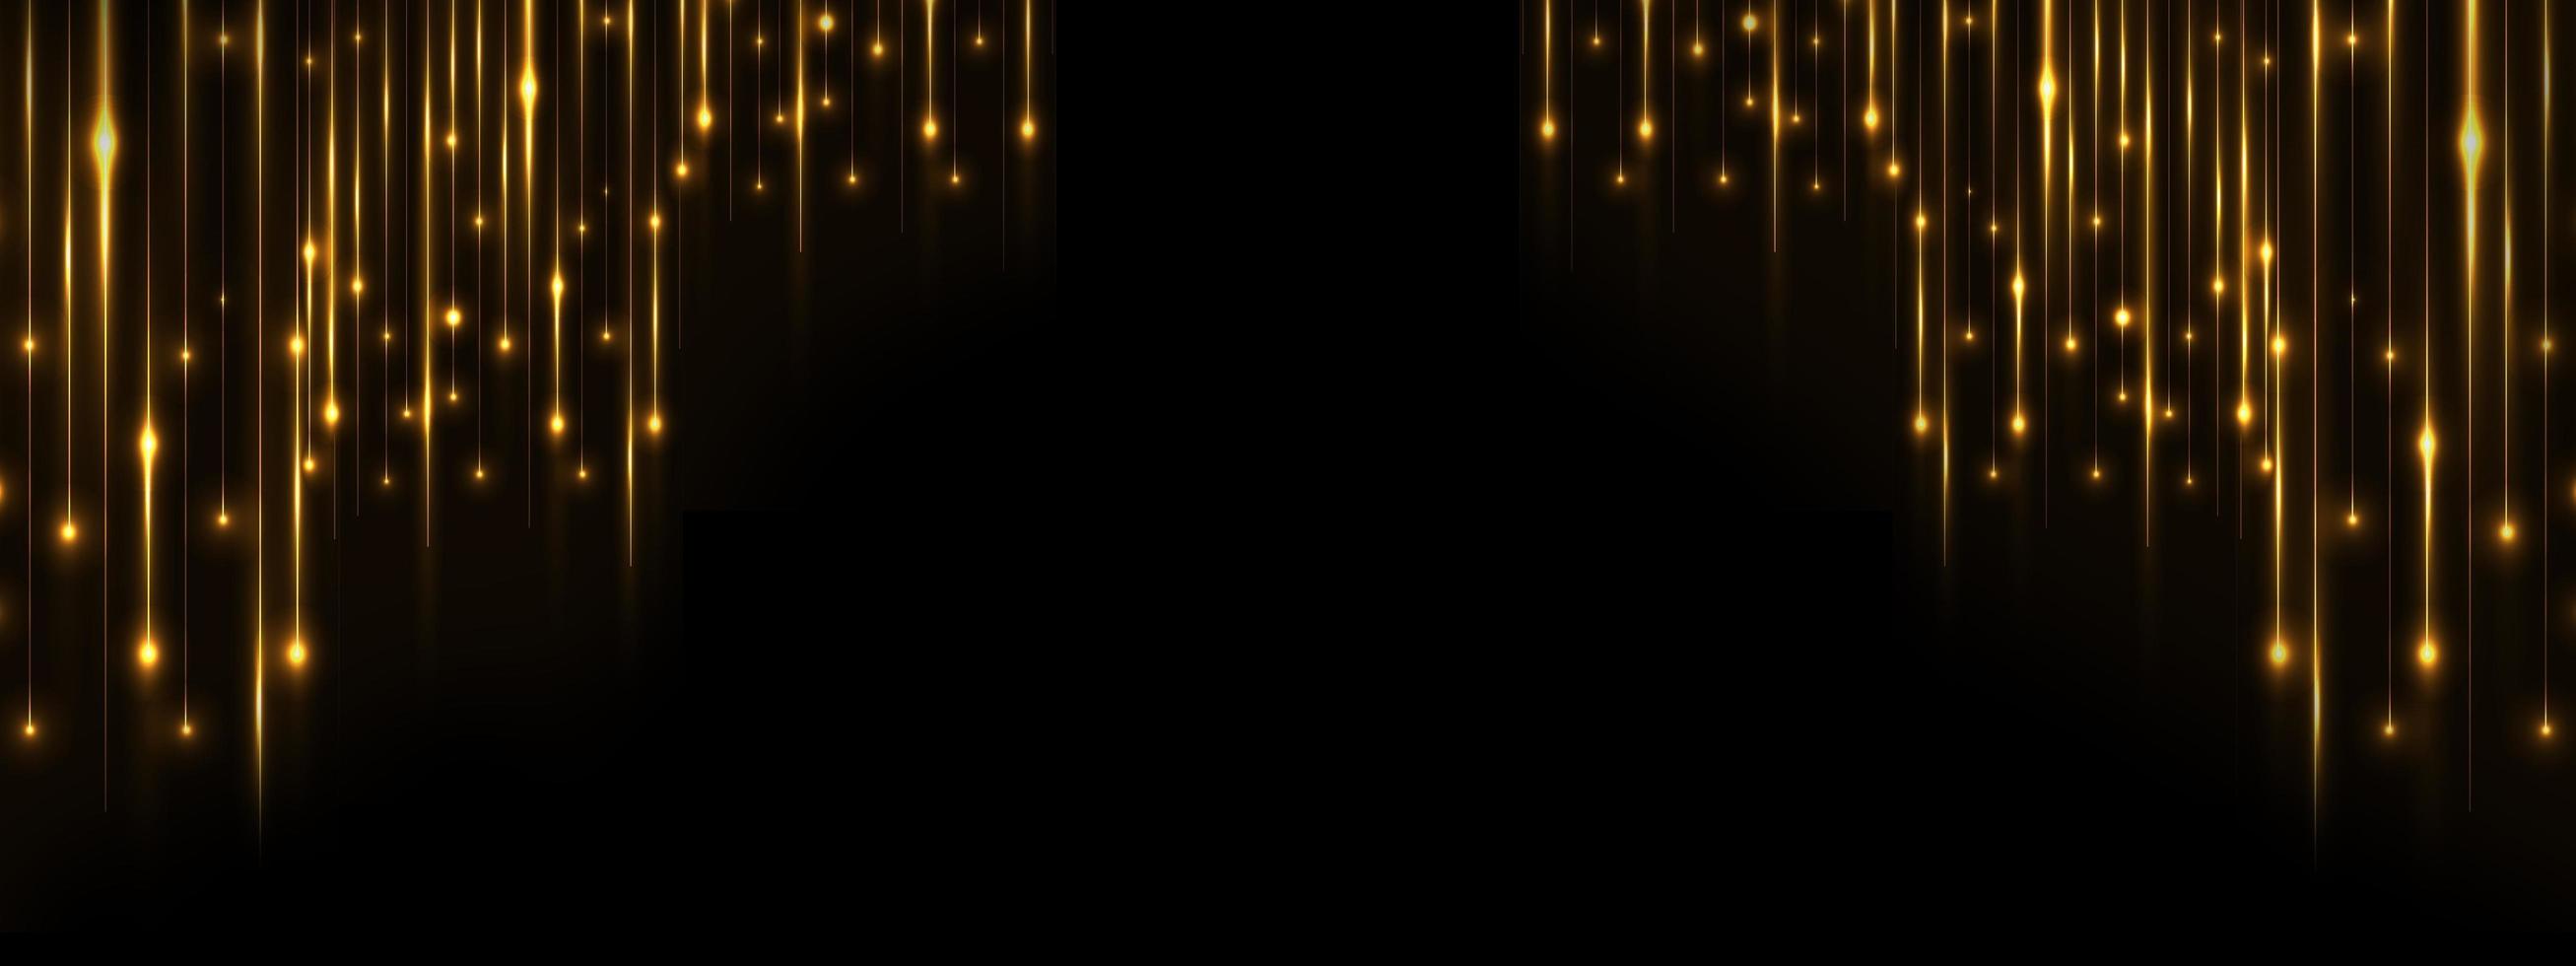 Black and Golden Royal Awards Graphics Background. Lights Elegant Shine Modern Template. Space Falling Star Particles Corporate Template. Classy Certificate Banner. photo